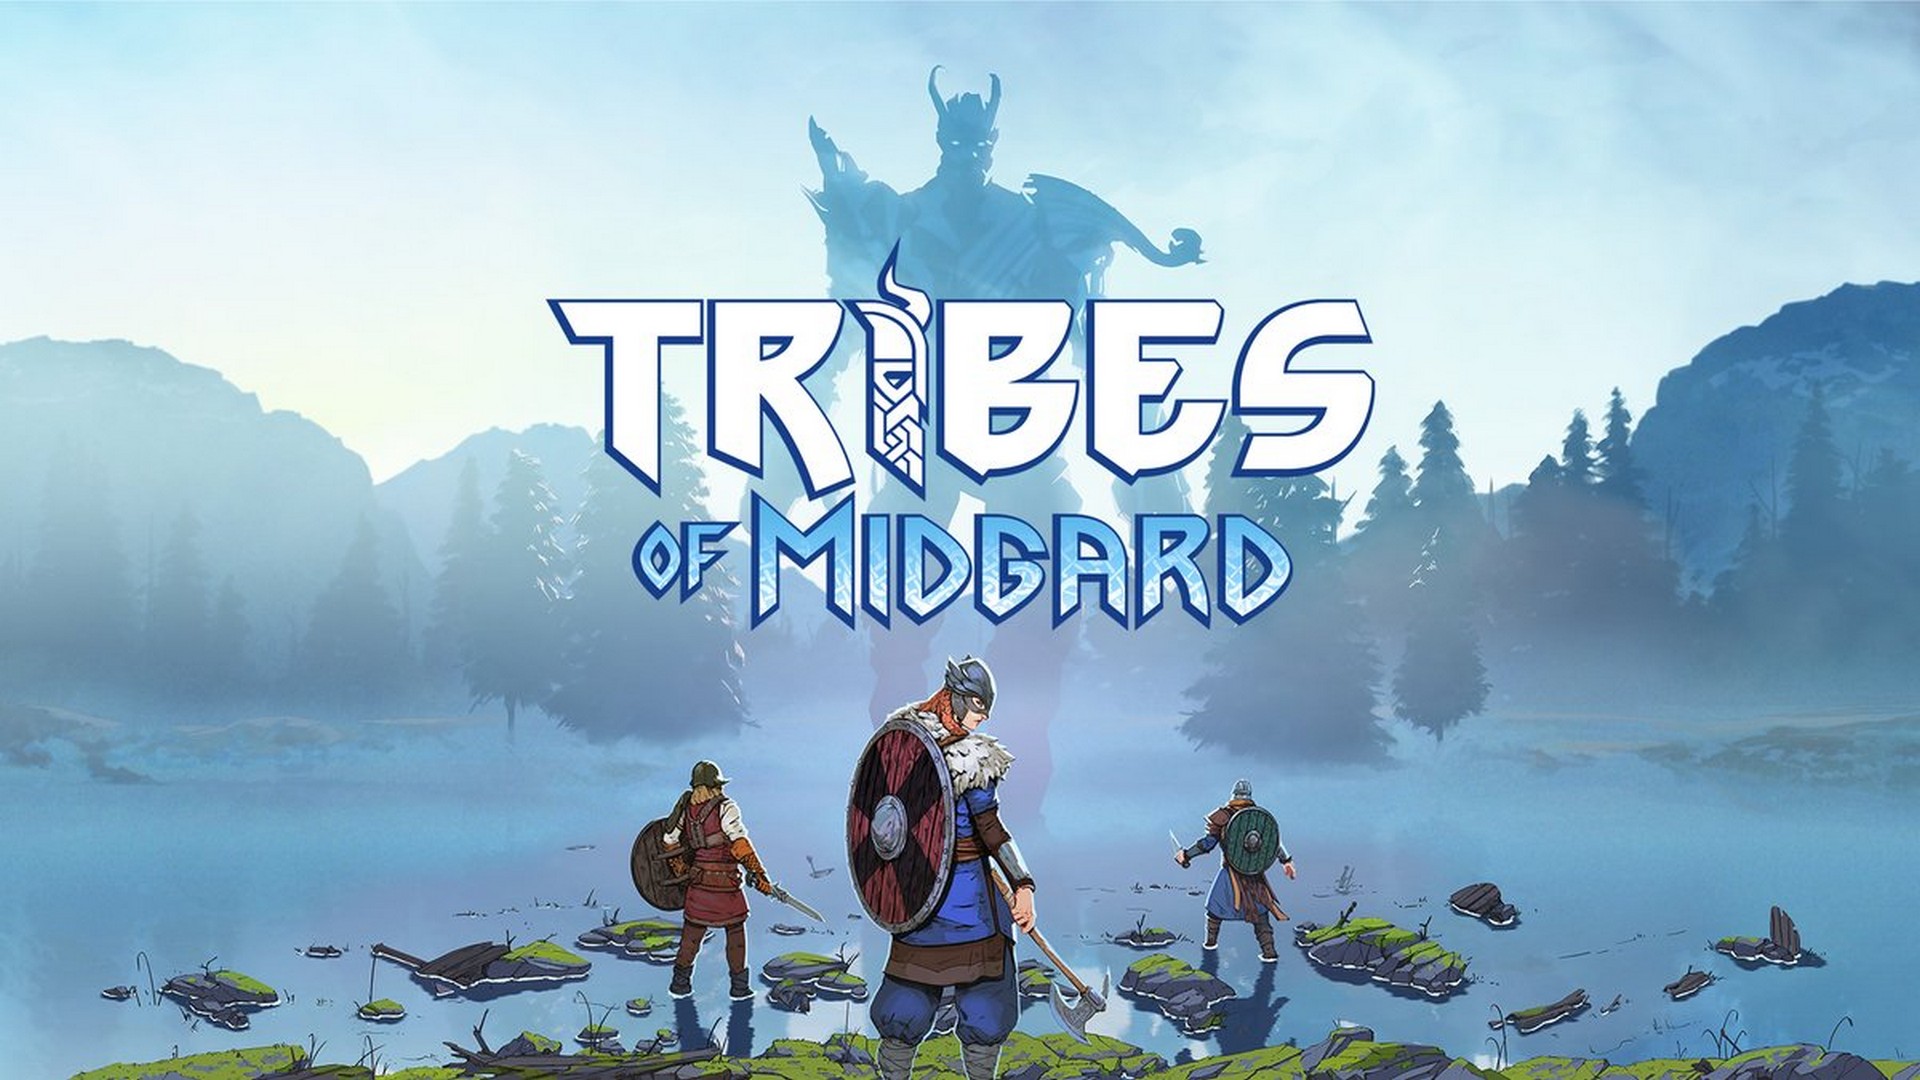 Tribes of Midgard Reviews - OpenCritic